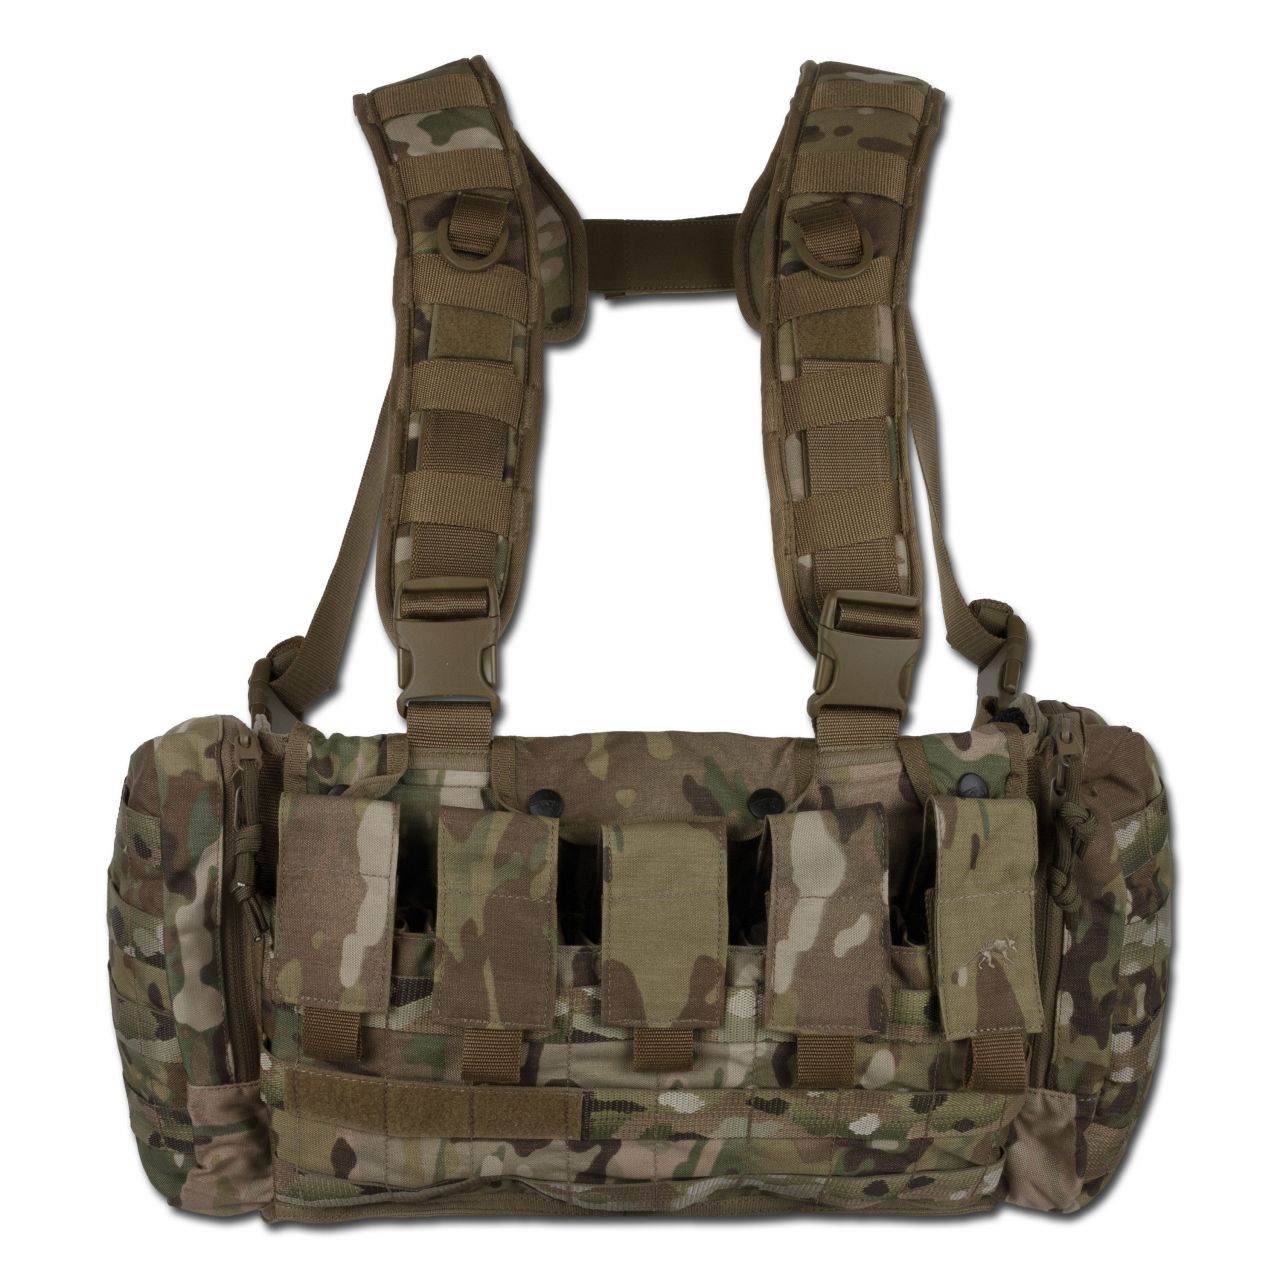 Purchase the Chest Rig TT MK II M4, multicam by ASMC